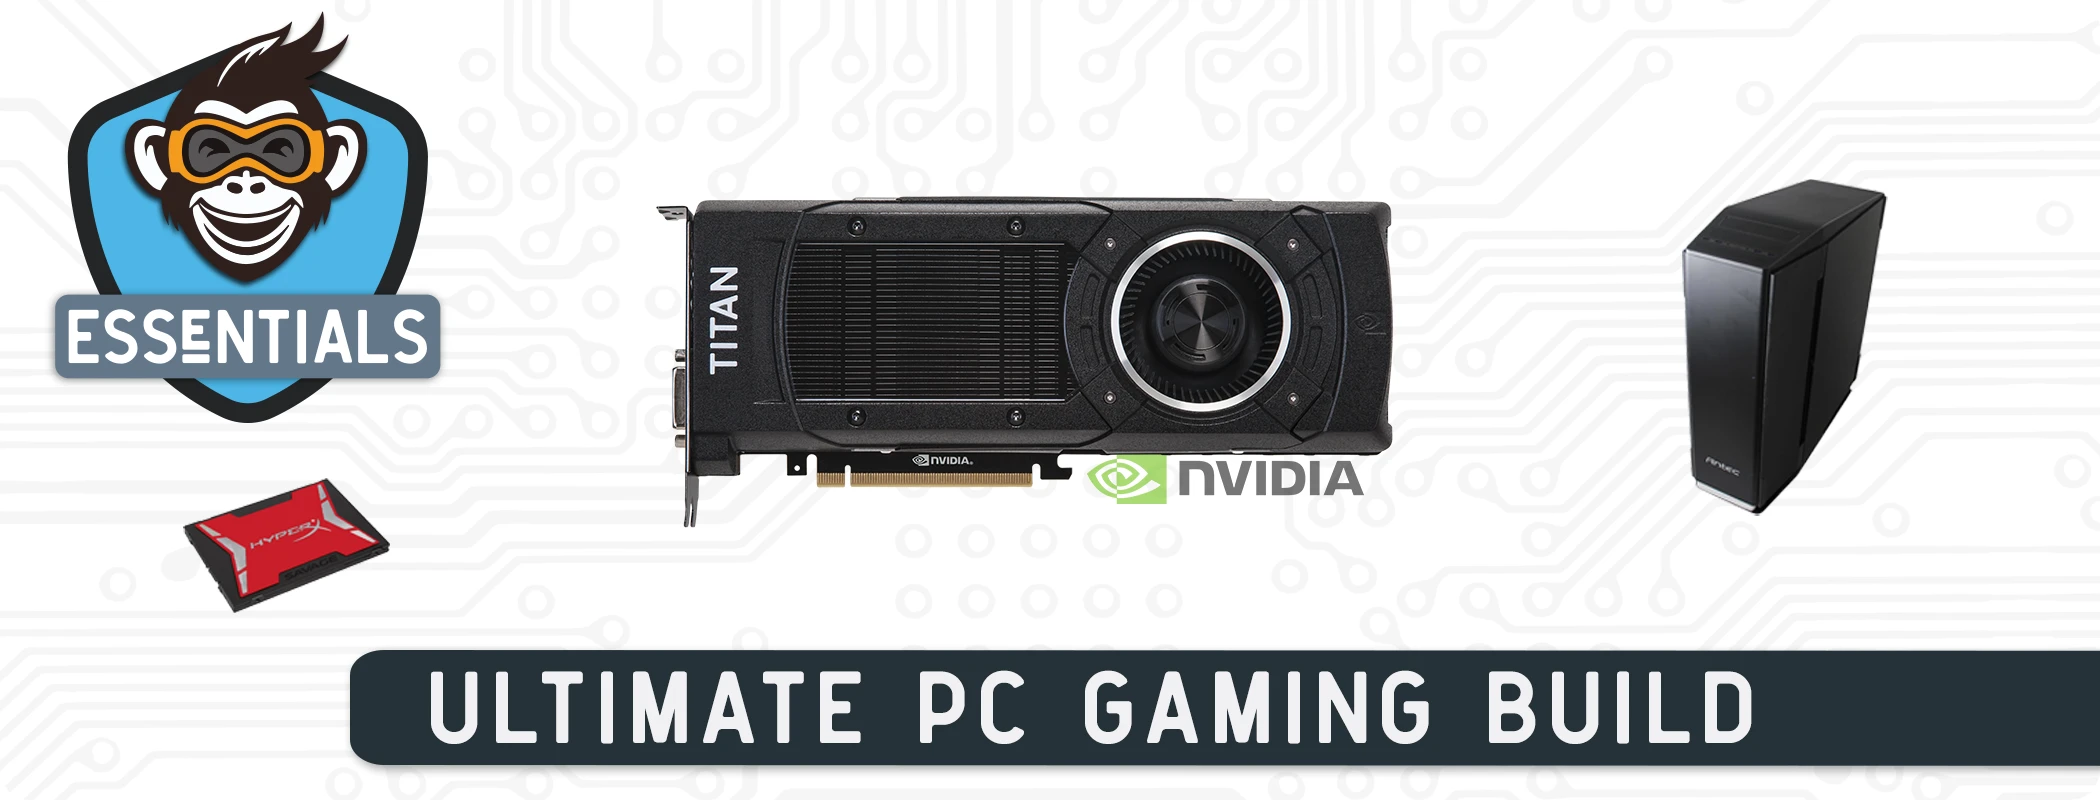 Essentials - Building The Ultimate Gaming PC with the Nvidia Titan X